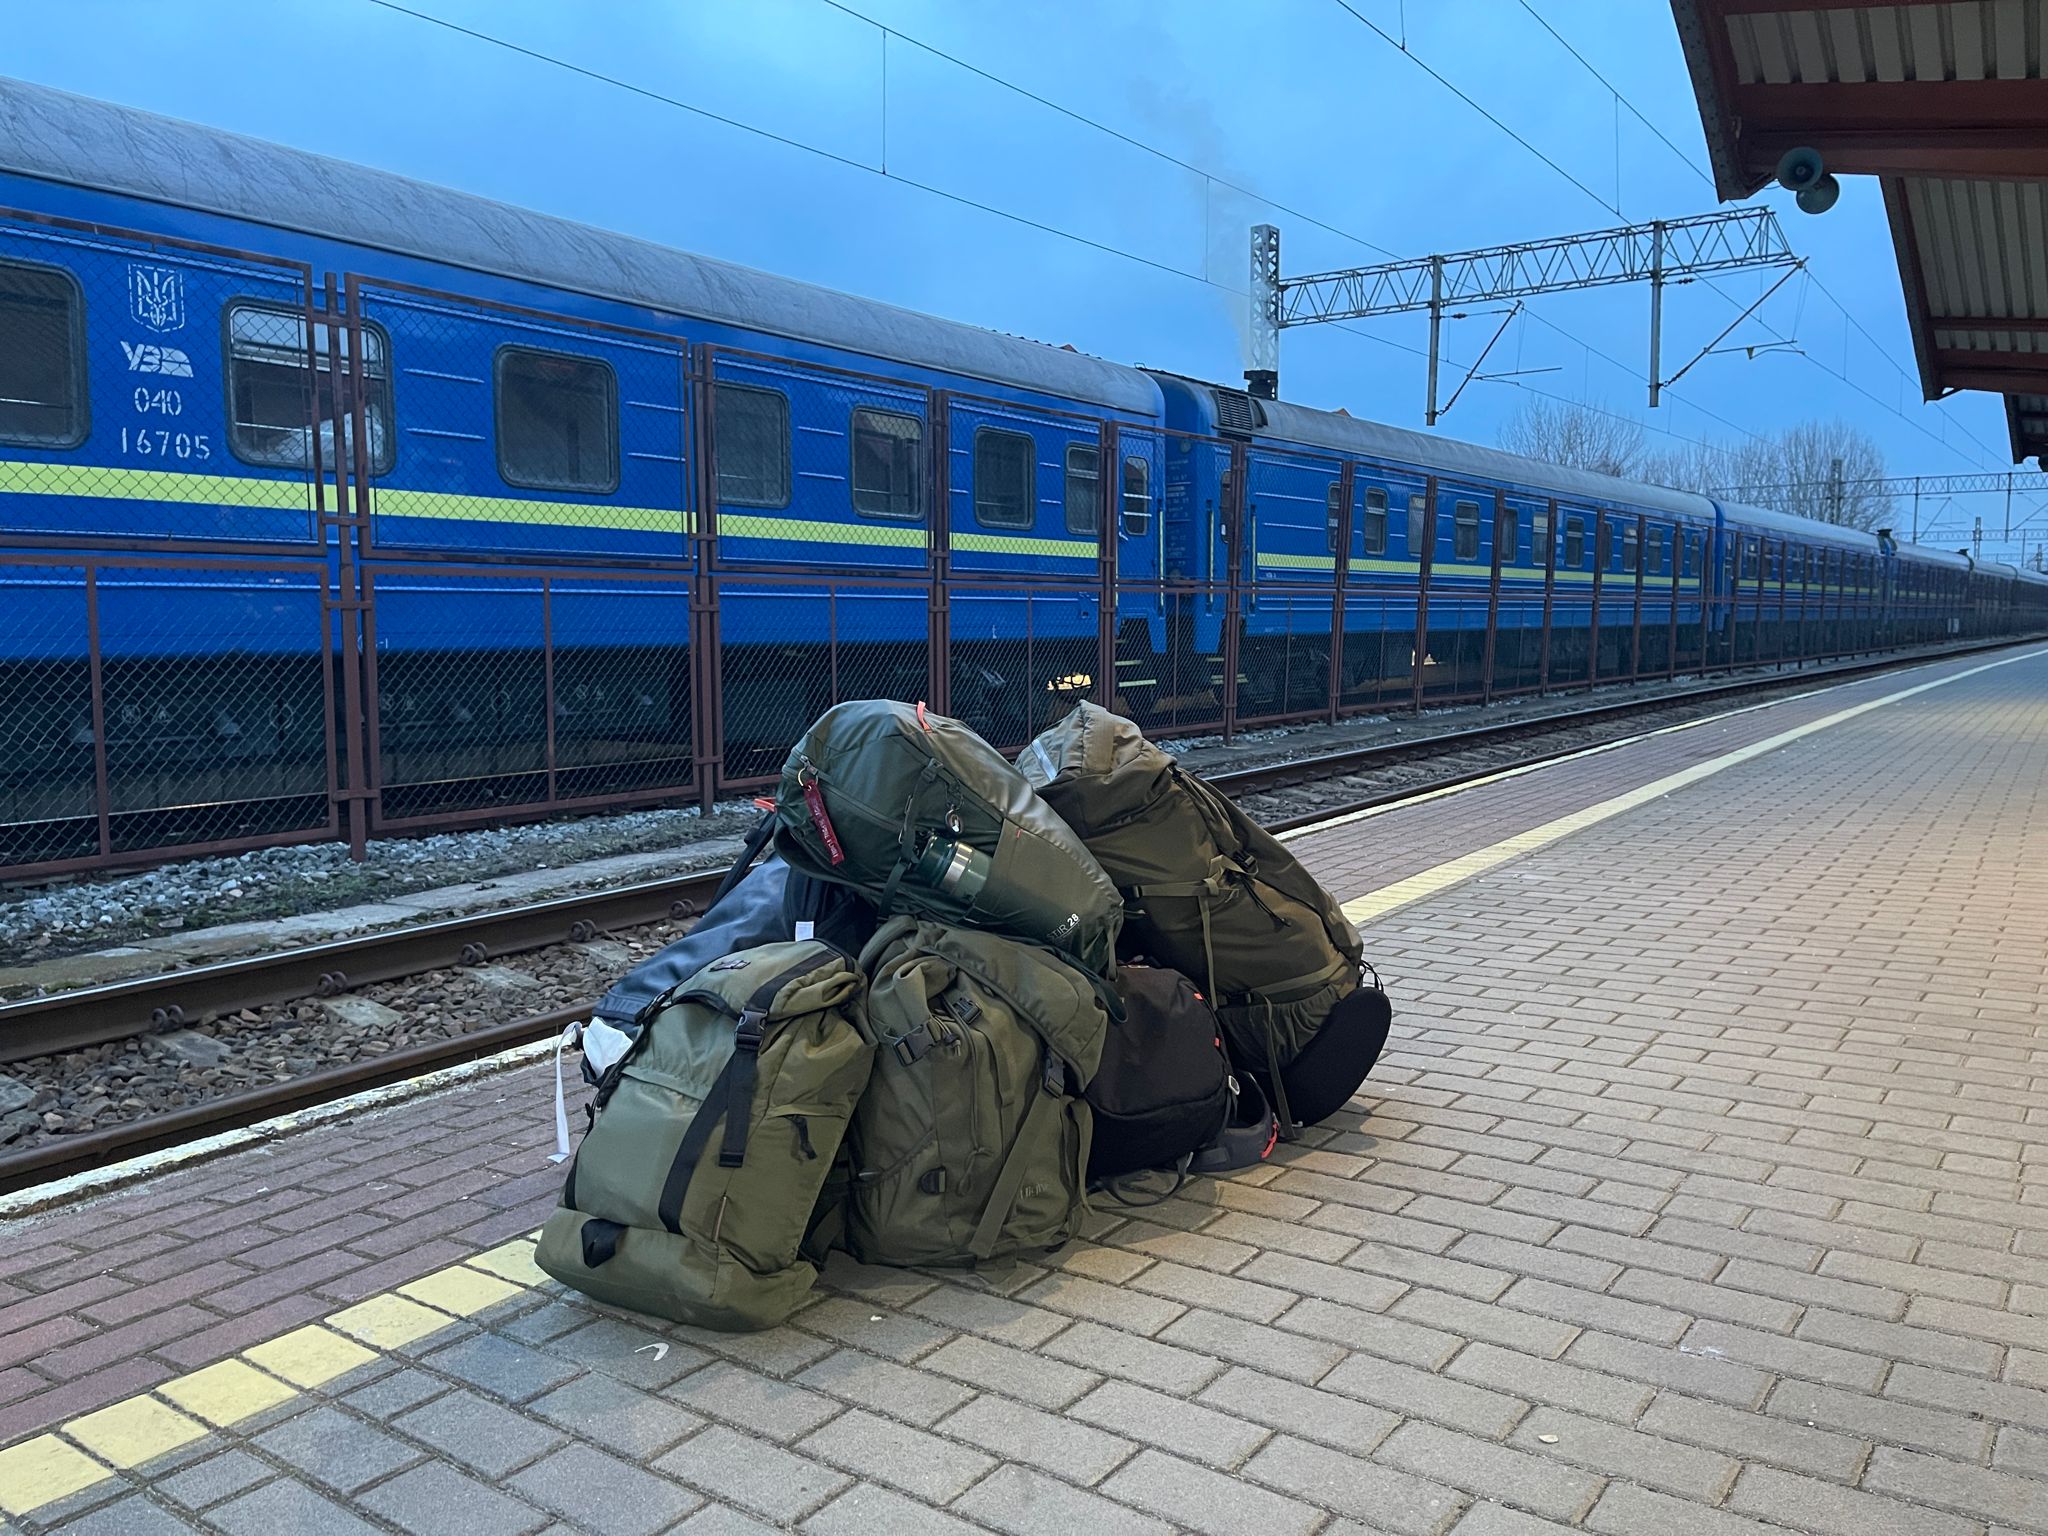 A photo of rucksacks and sleeping bags on a train platform in Ukraine